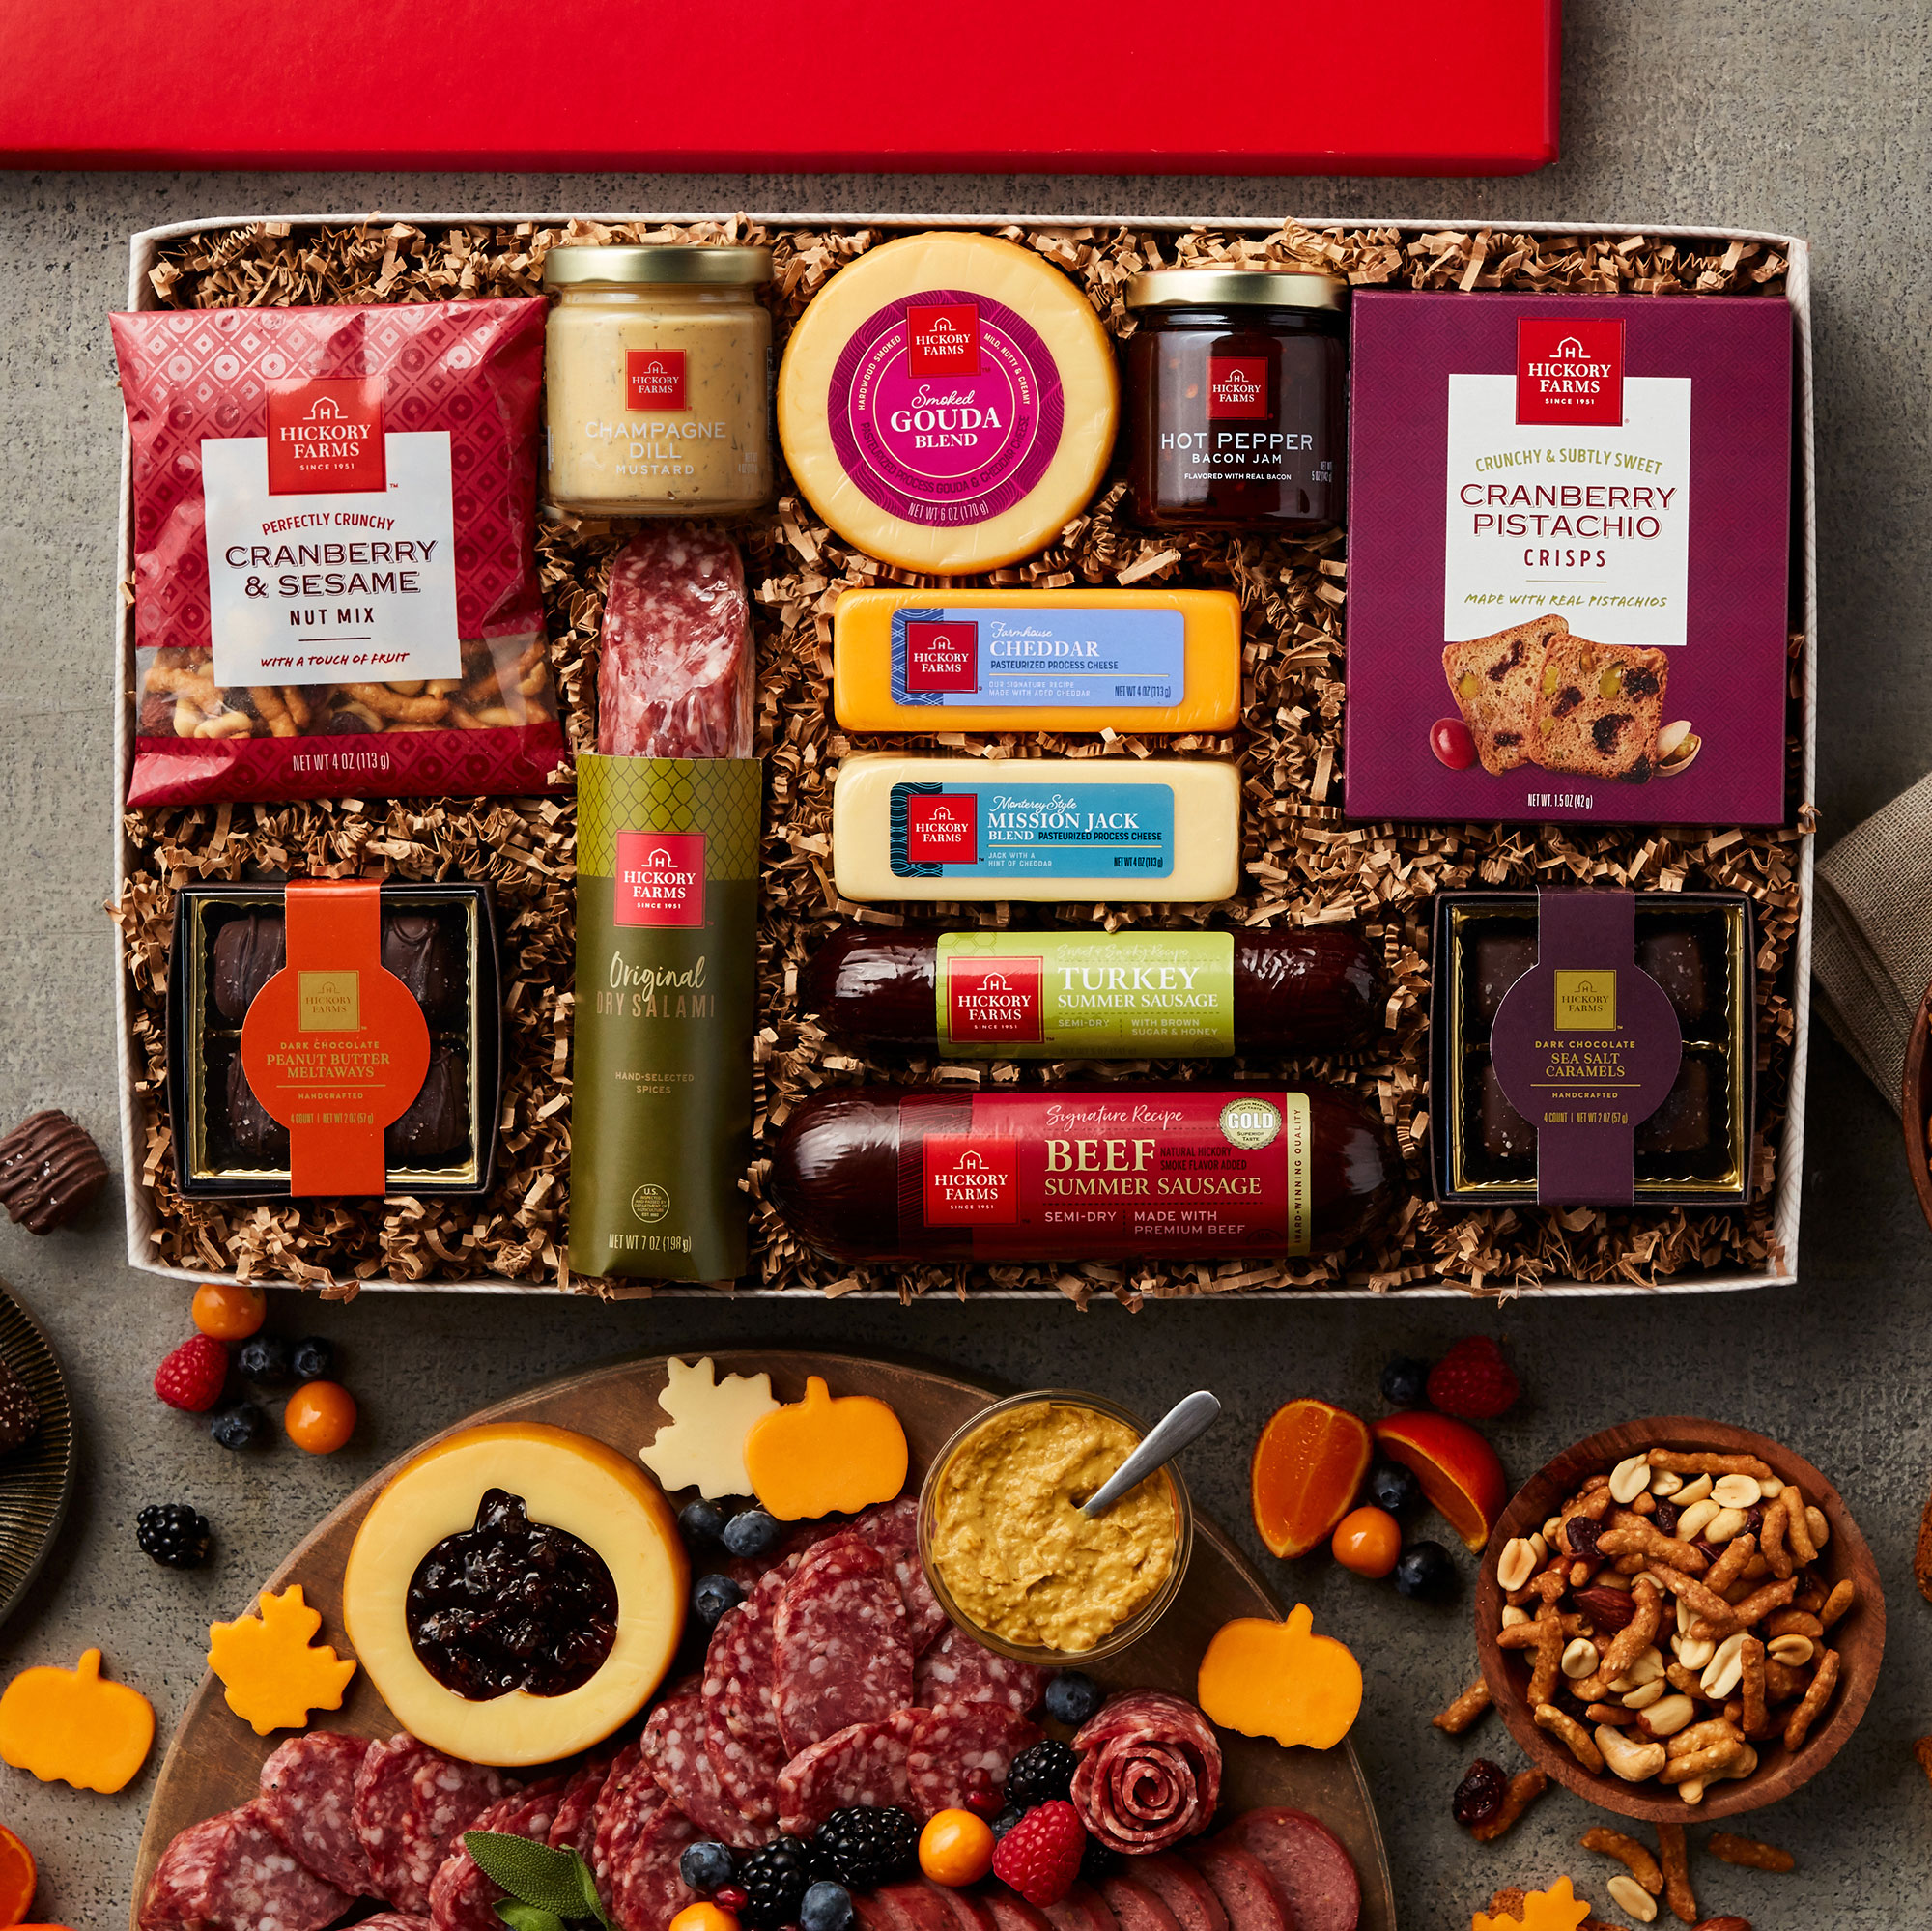 https://www.hickoryfarms.com/on/demandware.static/-/Sites-Web-Master-Catalog/default/dw39609701/images/products/premium-charcuterie-chocolate-gift-box-fall-006544-1.jpg